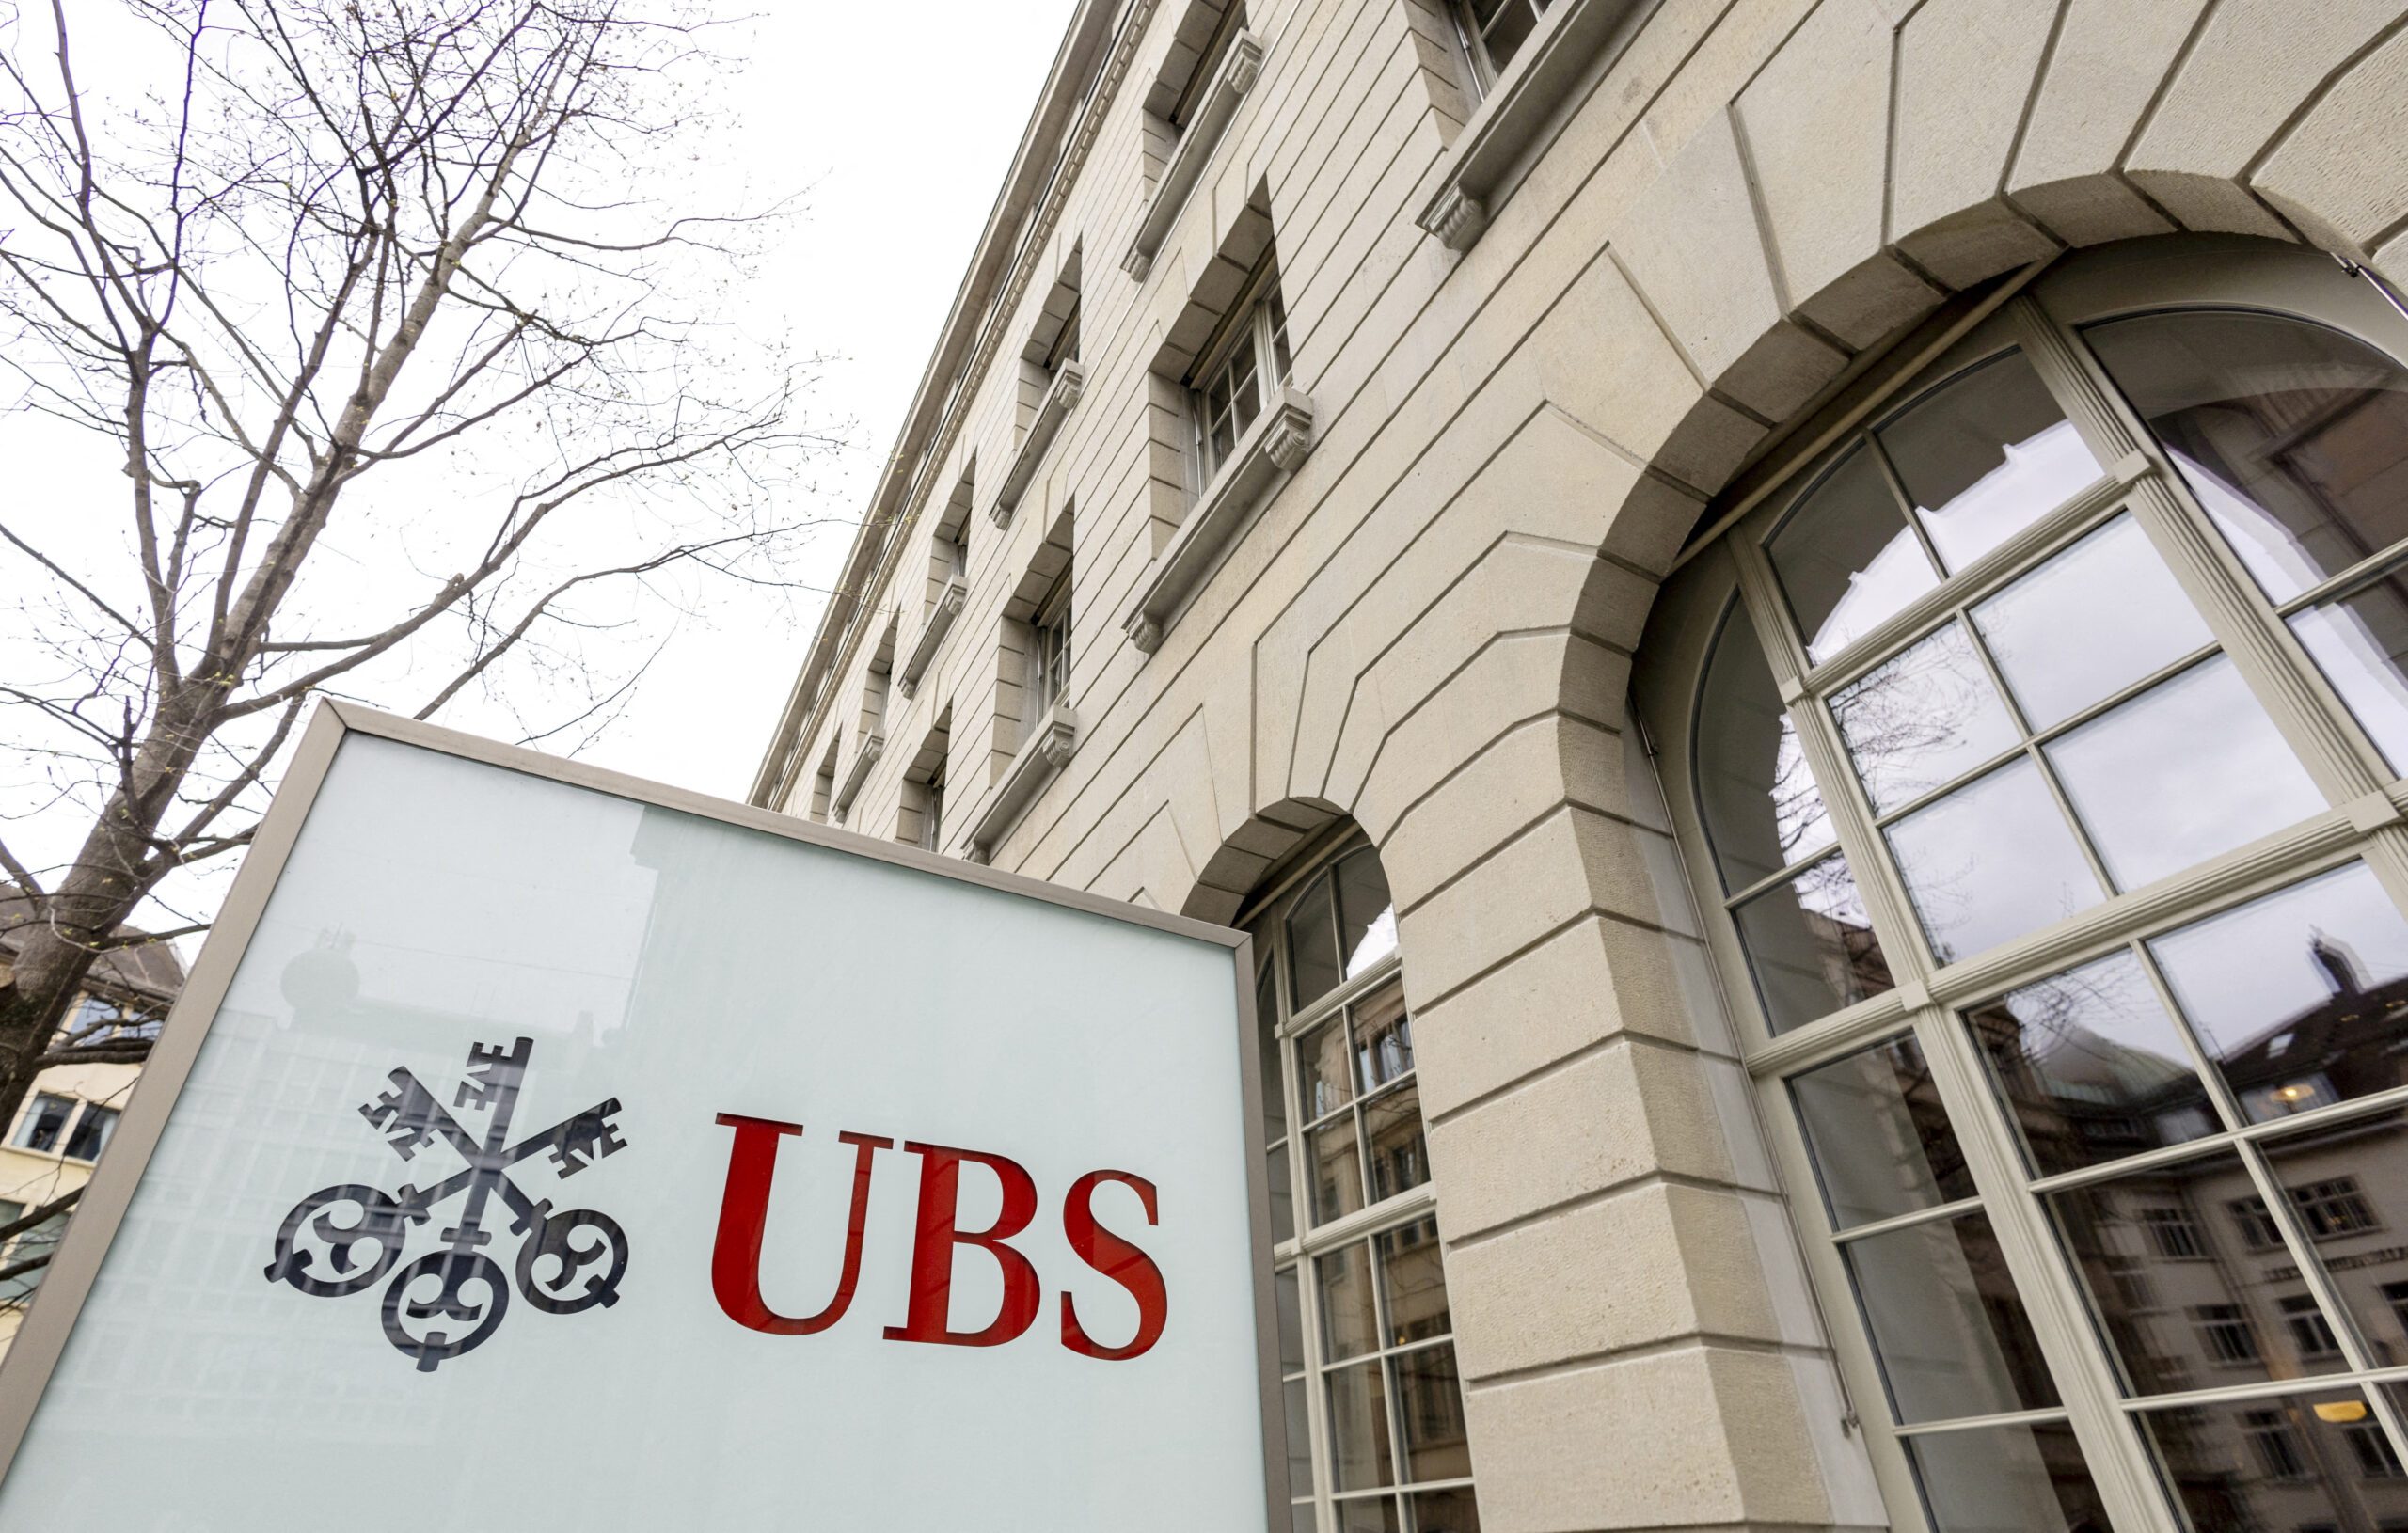 People Digest: Indonesia's INA, UBS make key appointments